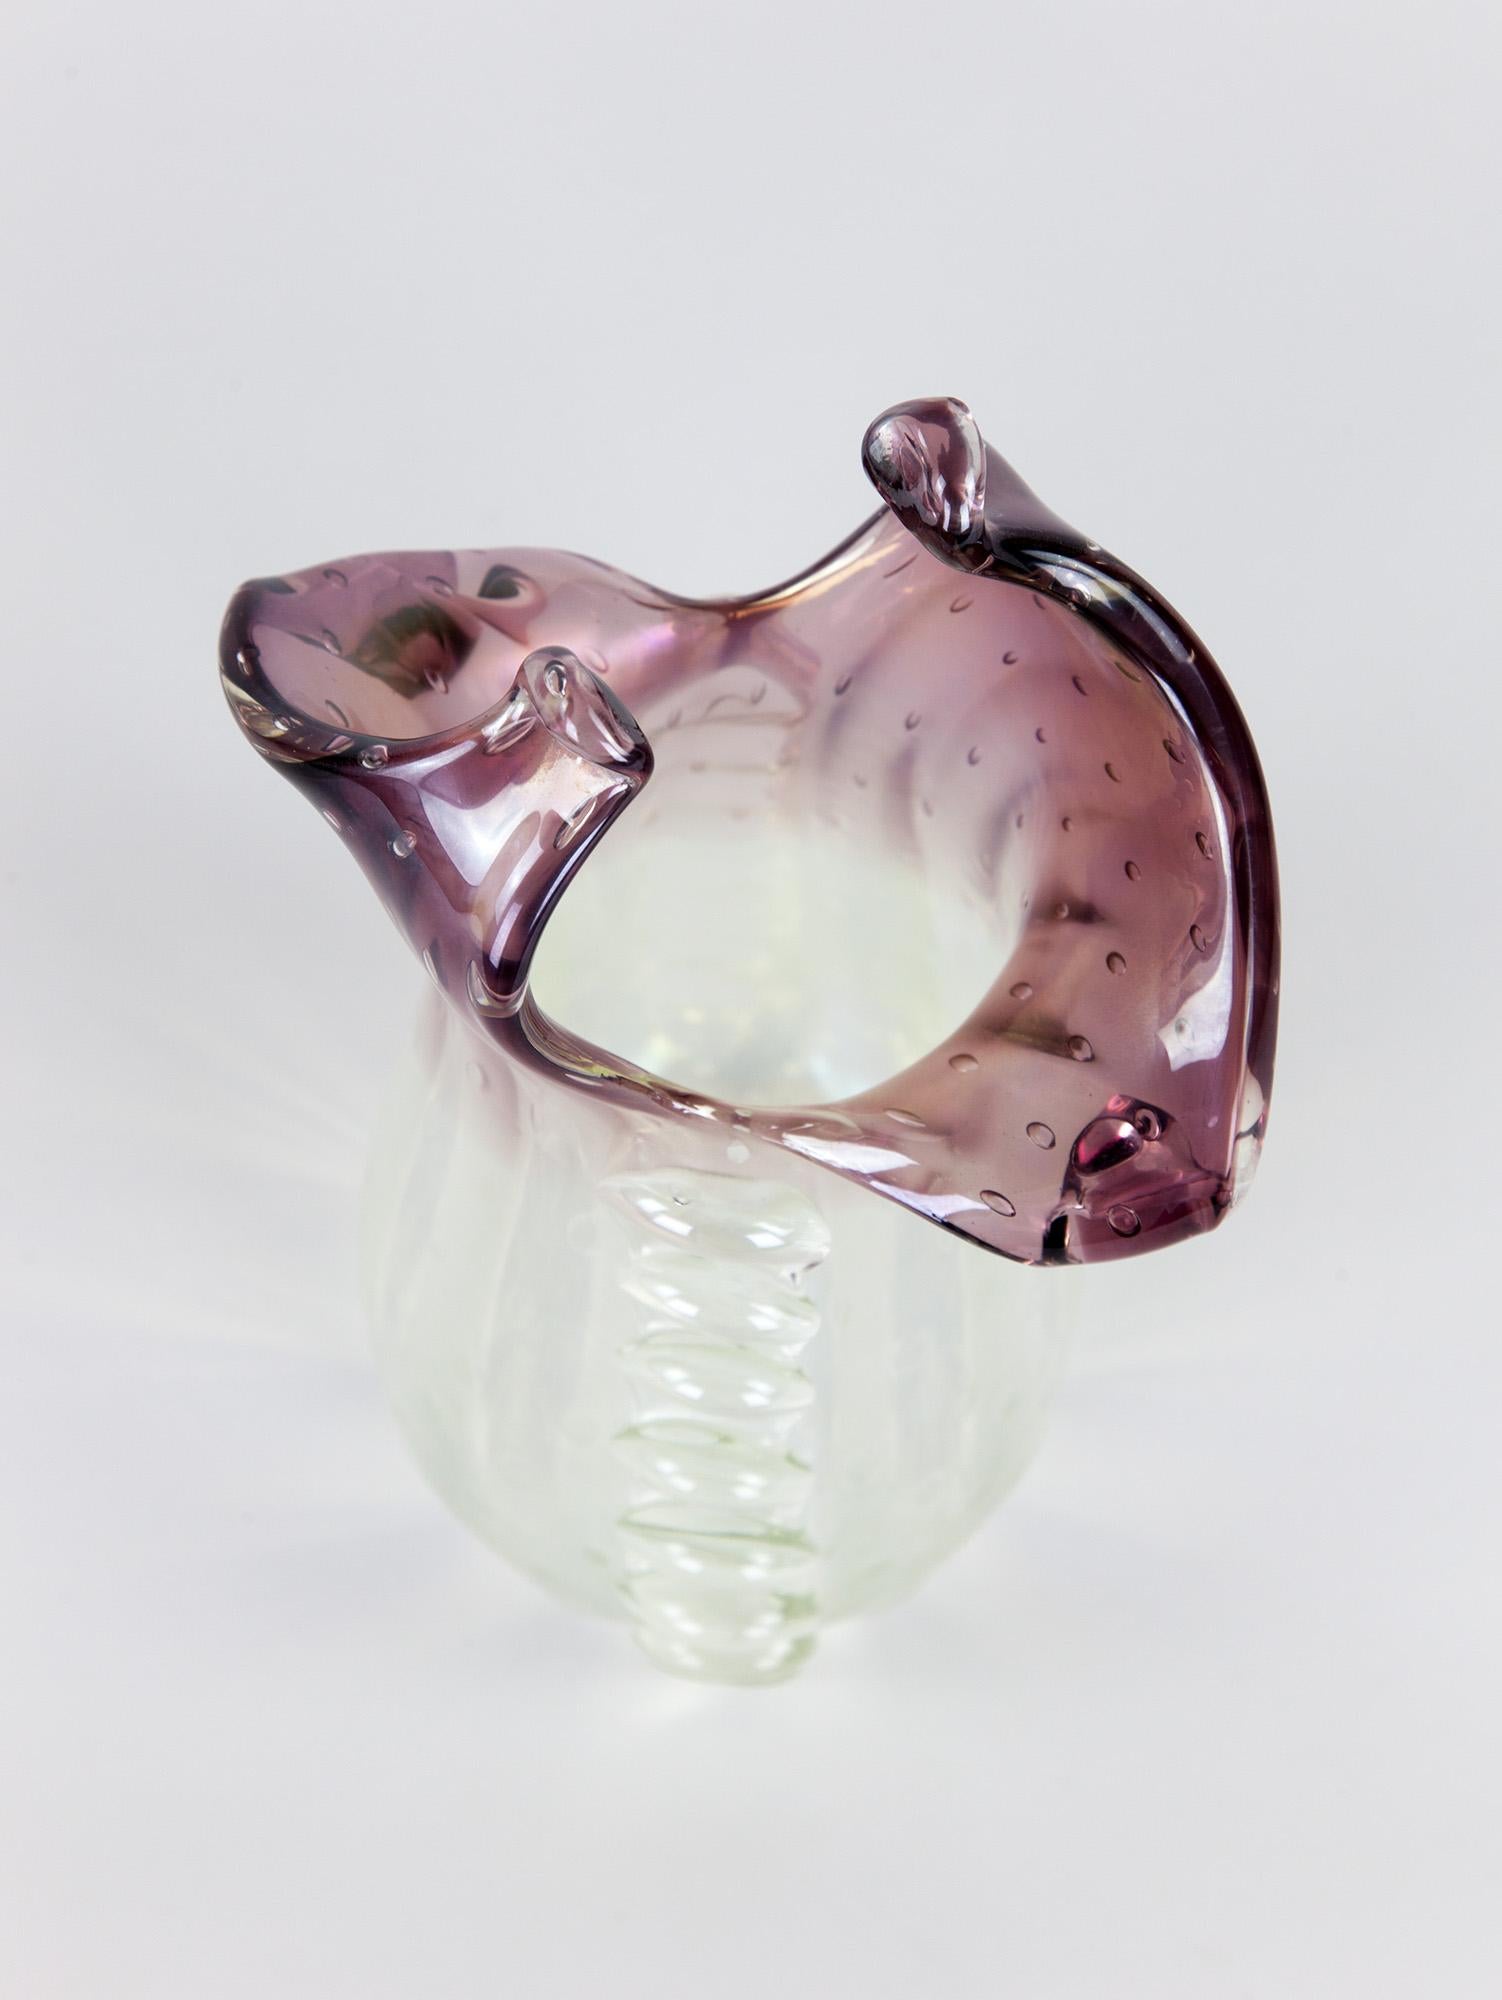 Vintage Italian Murano Pearlescent Glass Vase, 1940s For Sale 7